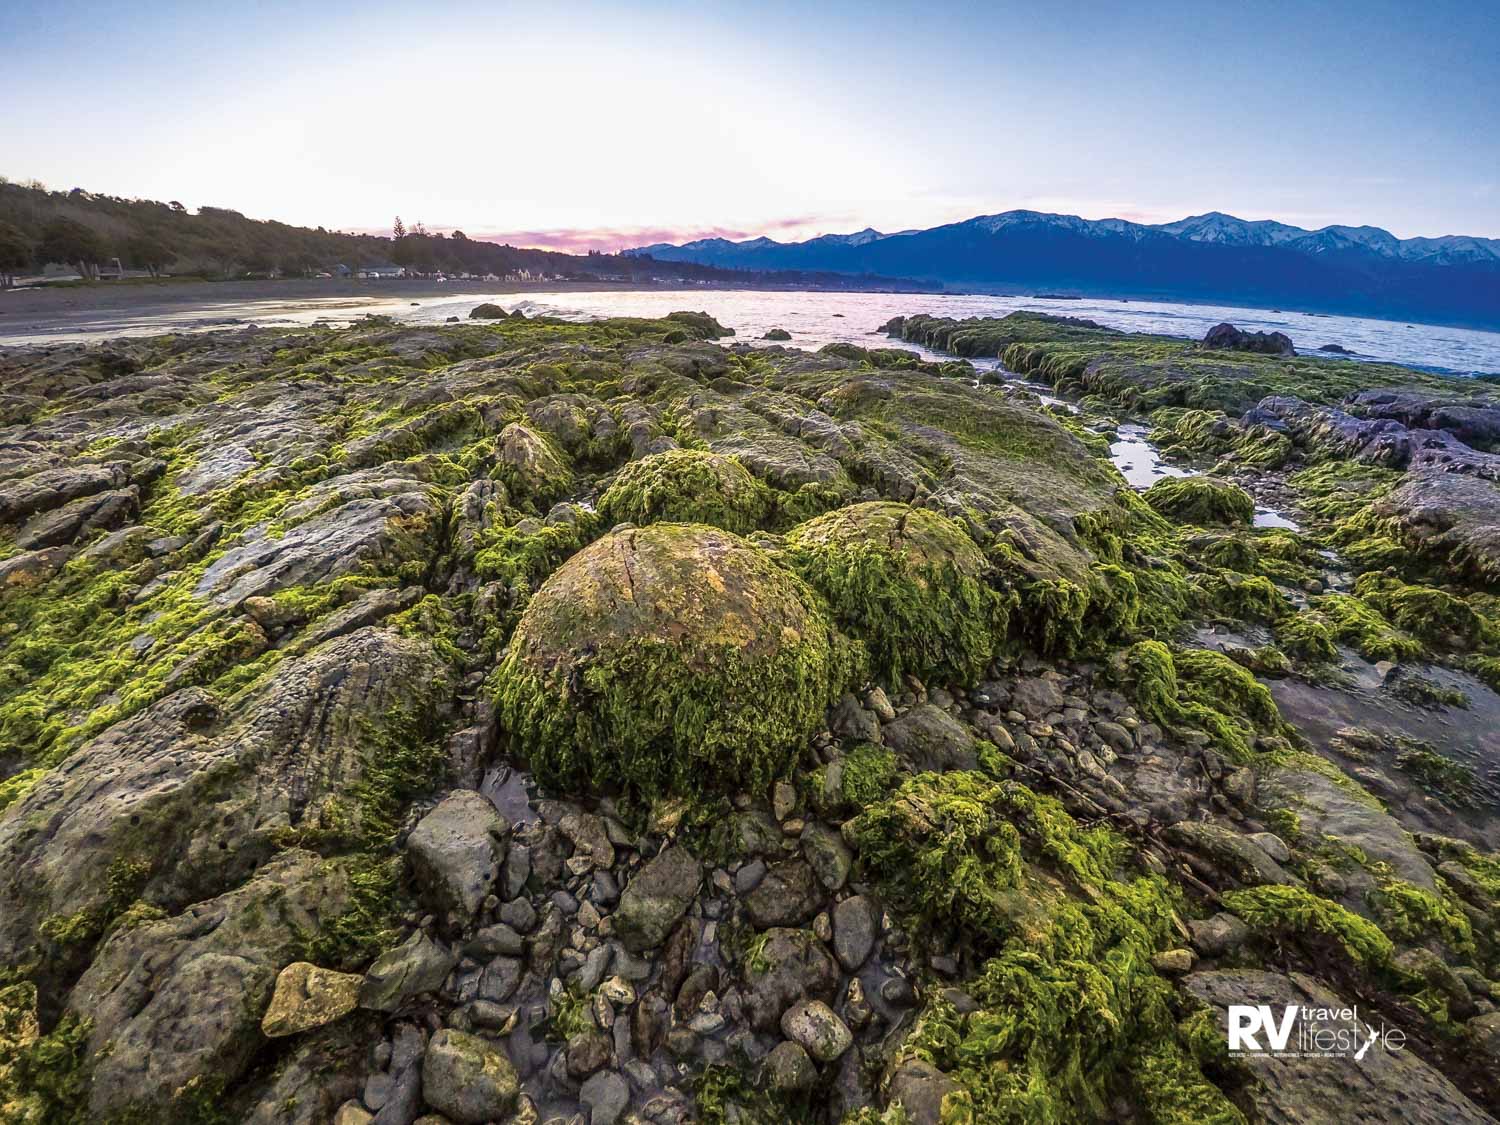 Quirky rock formations were exposed with the uplifted seabed. Photo Bare Kiwi